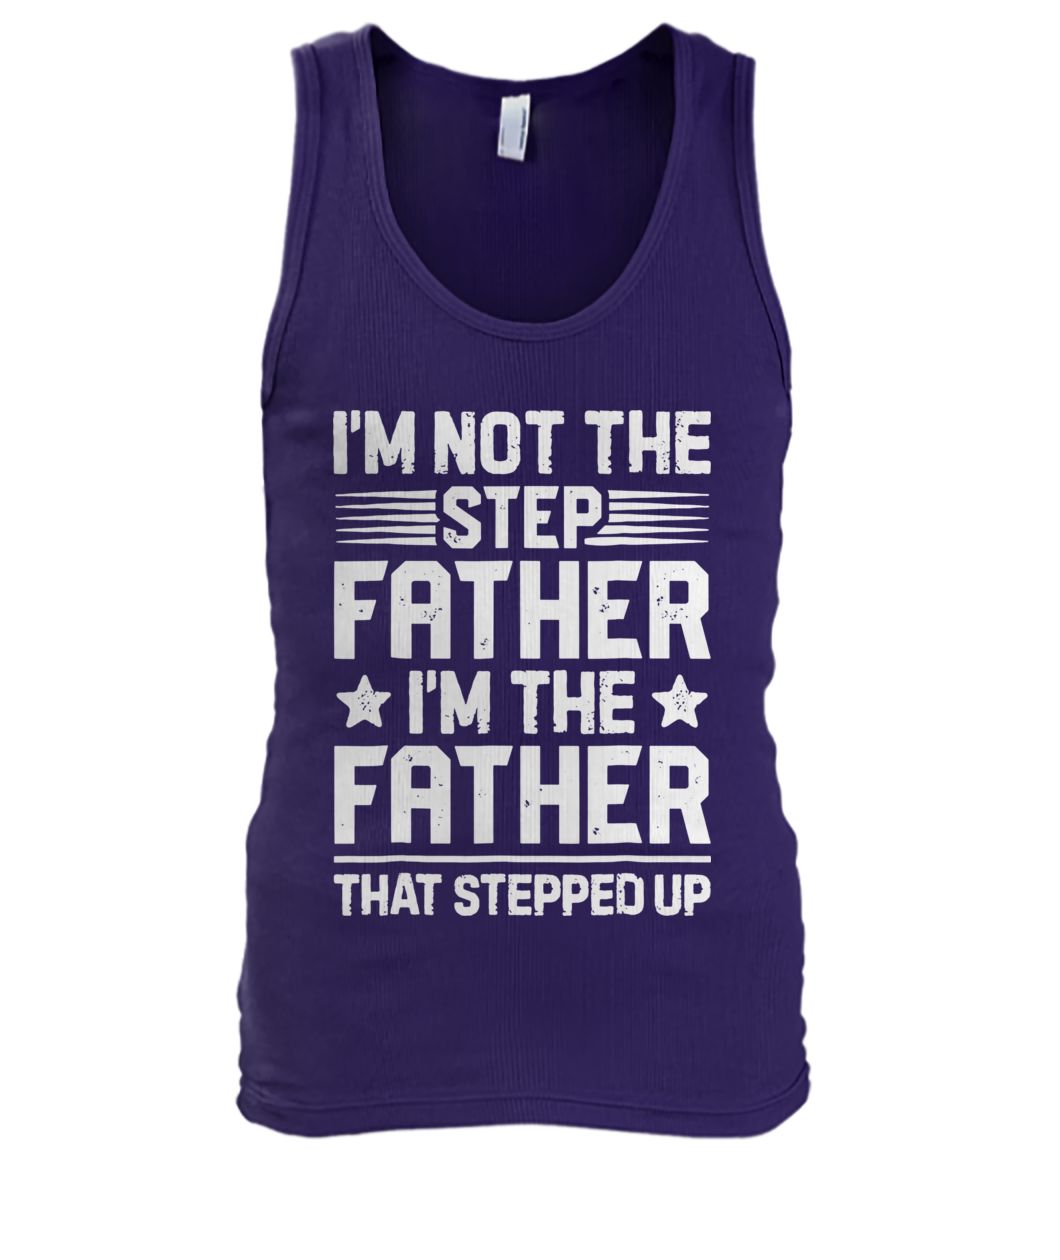 I'm not the step father I'm just the father that stepped up men's tank top